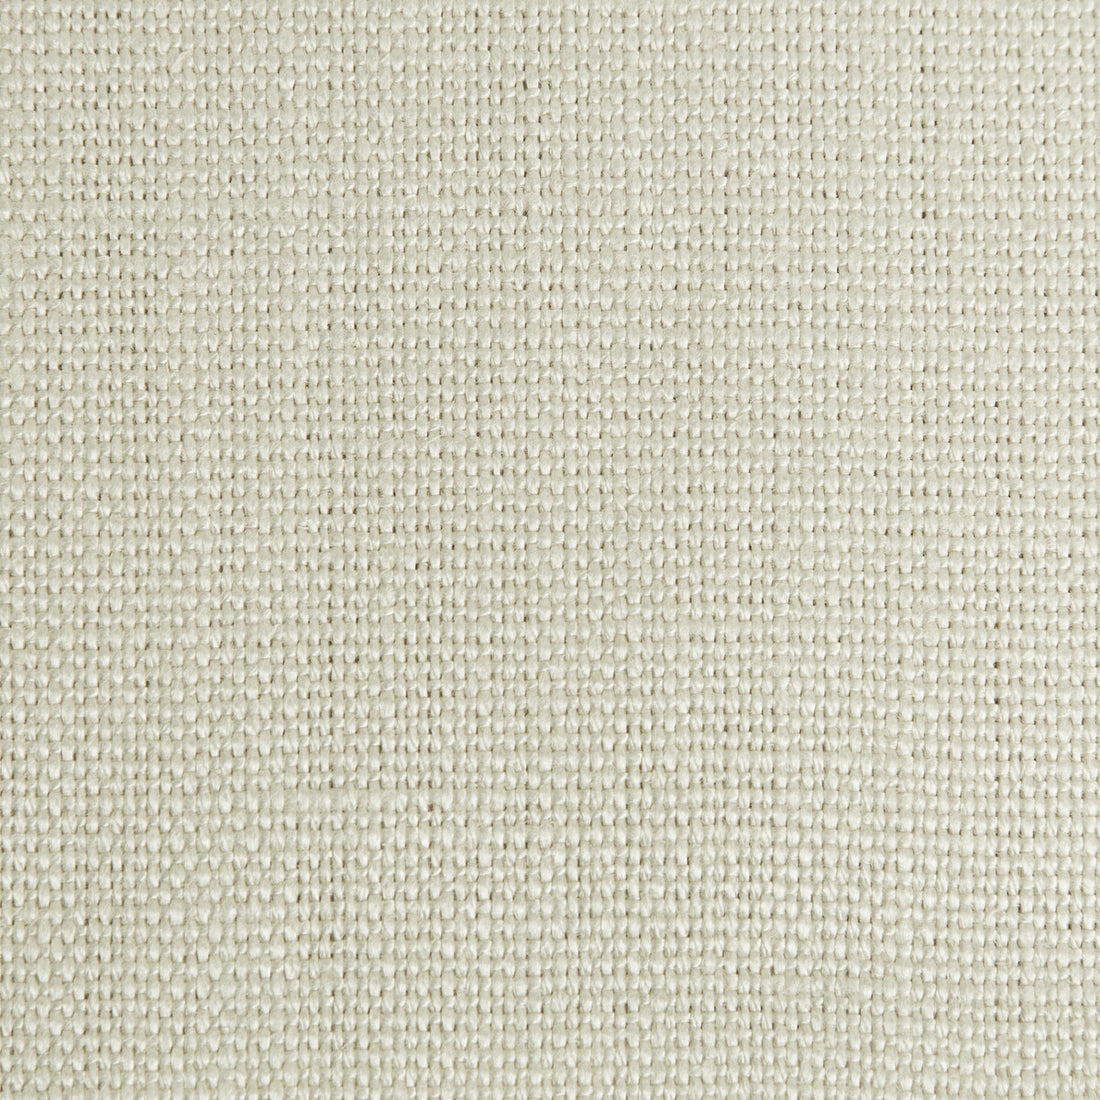 Hampton Linen fabric in mercury gray color - pattern 2012171.1101.0 - by Lee Jofa in the The Complete Linen IV collection